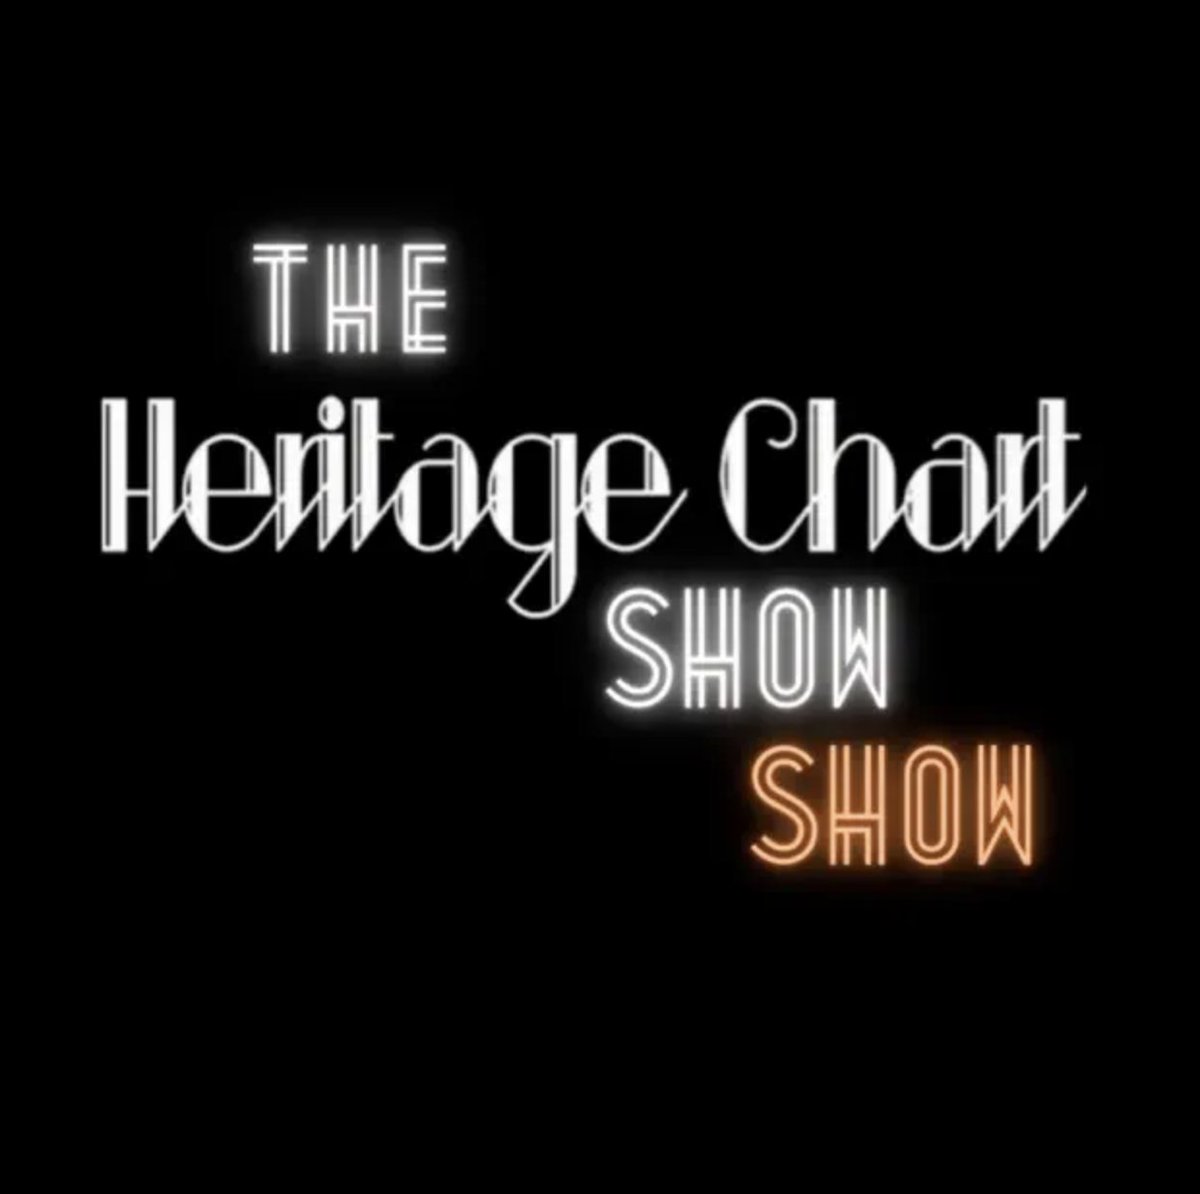 Lawrence appeared on the pilot episode of new podcast The Heritage Chart Show with Siân Pattenden and Pete Paphides. Listen on Apple or Spotify below - or wherever you get your podcasts: podcasts.apple.com/gb/podcast/the… open.spotify.com/episode/6zlnD0…